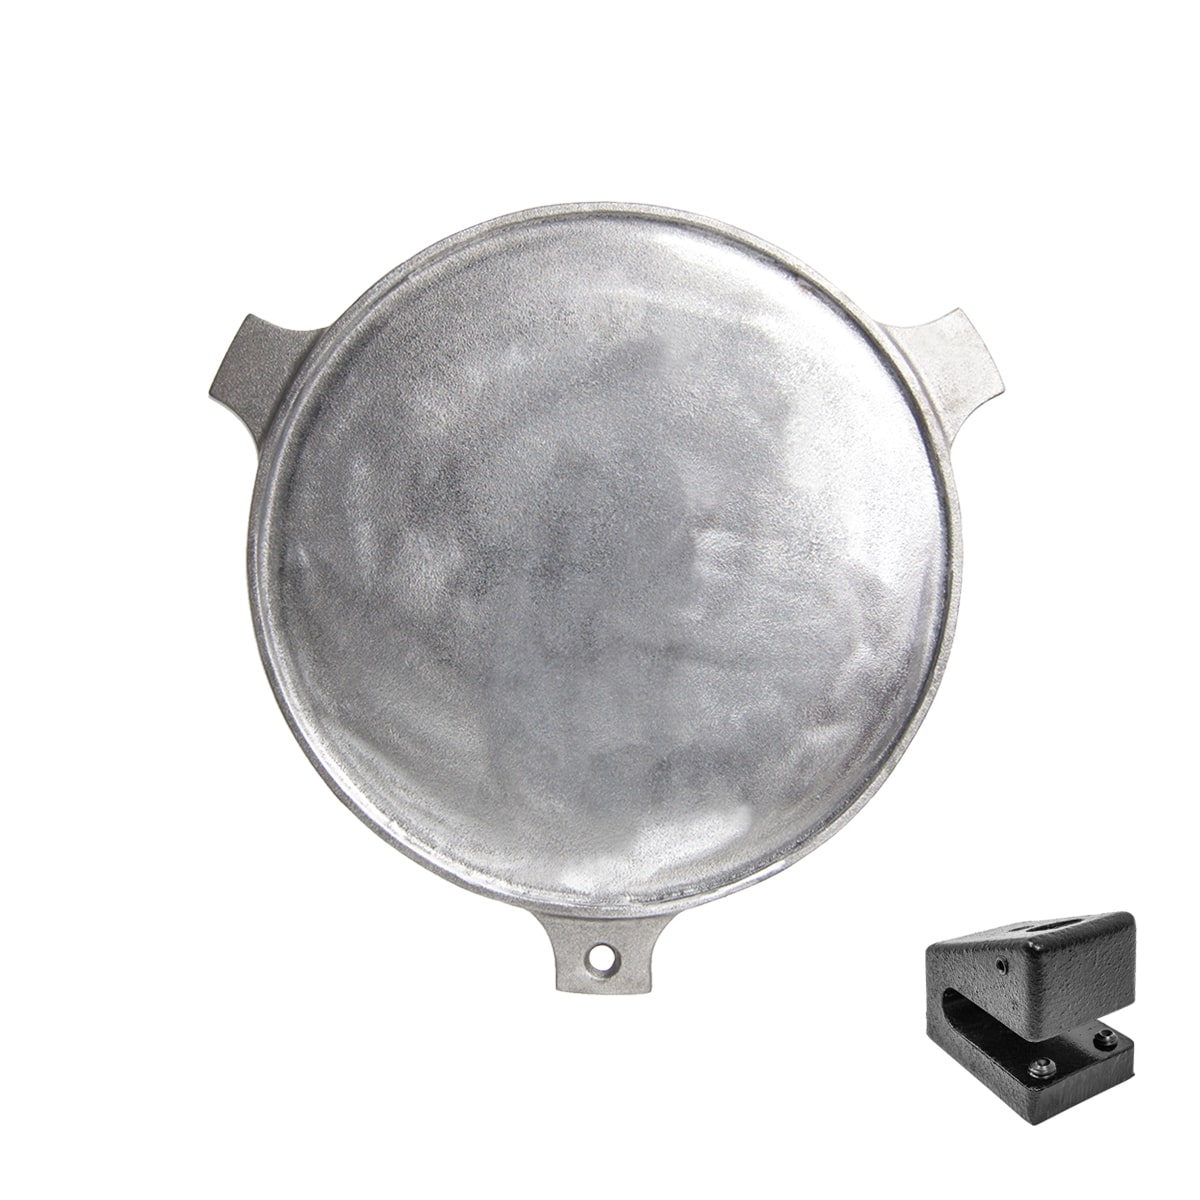 Fire Pit Cooking System Small 14" Searing Plate and Base